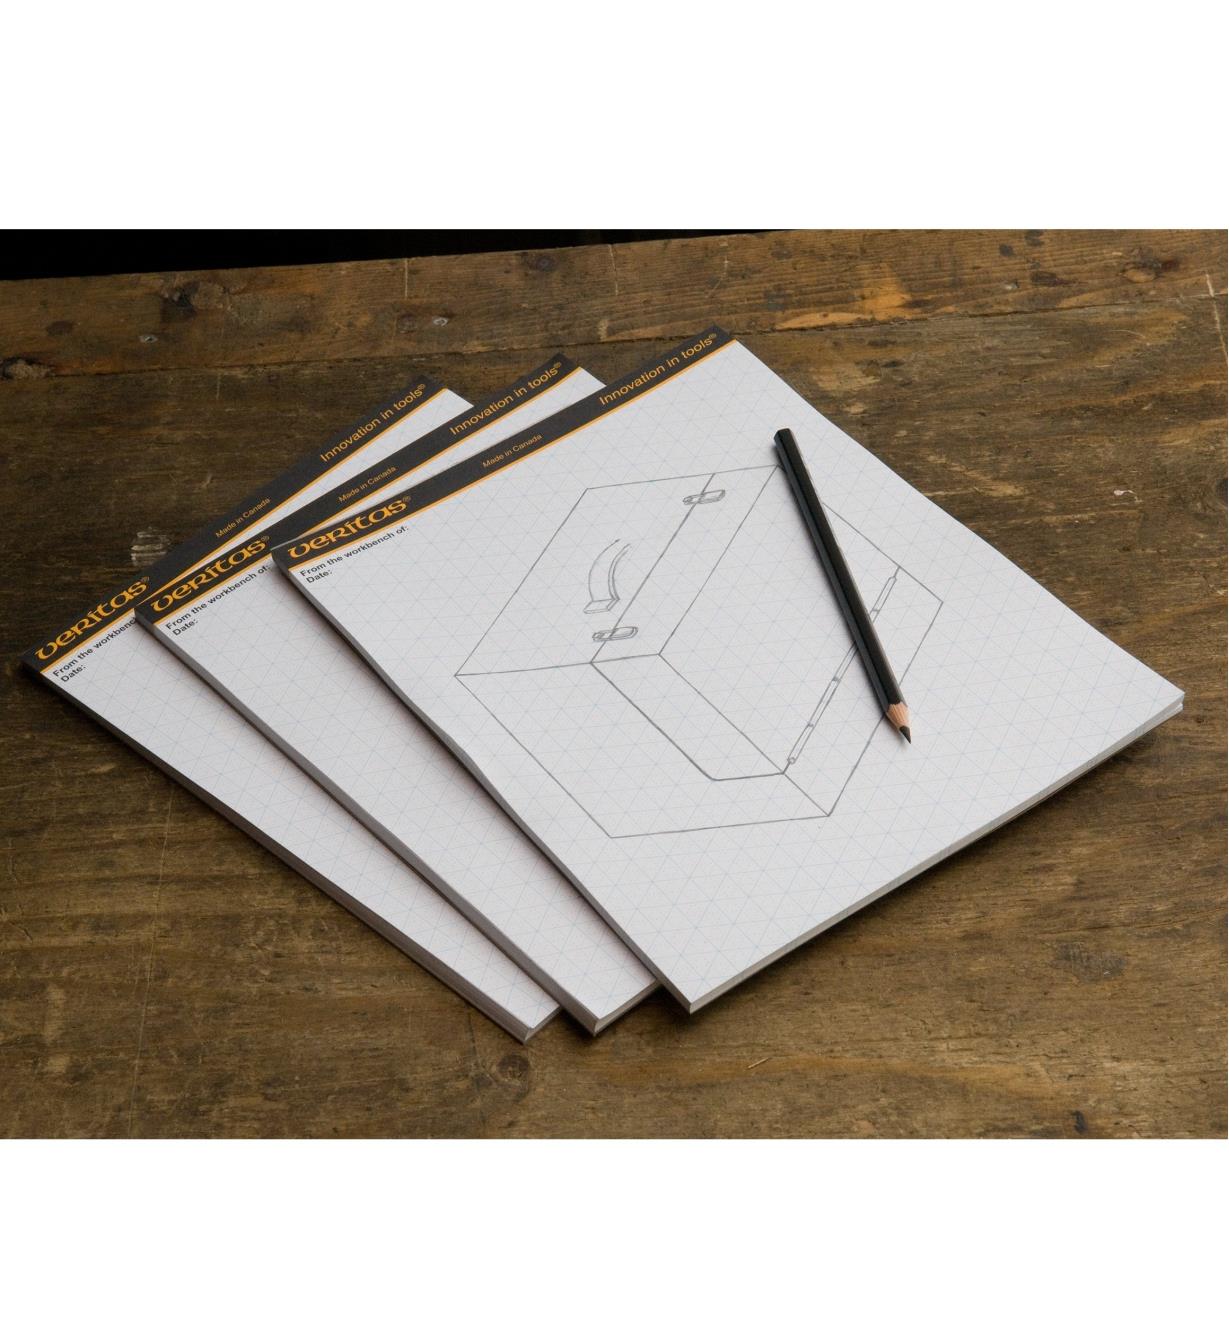 https://assets.leevalley.com/Size4/10065/05L2140-8-1-2-inch-x11-inch-drawing-pad-each-d-01-r.jpg